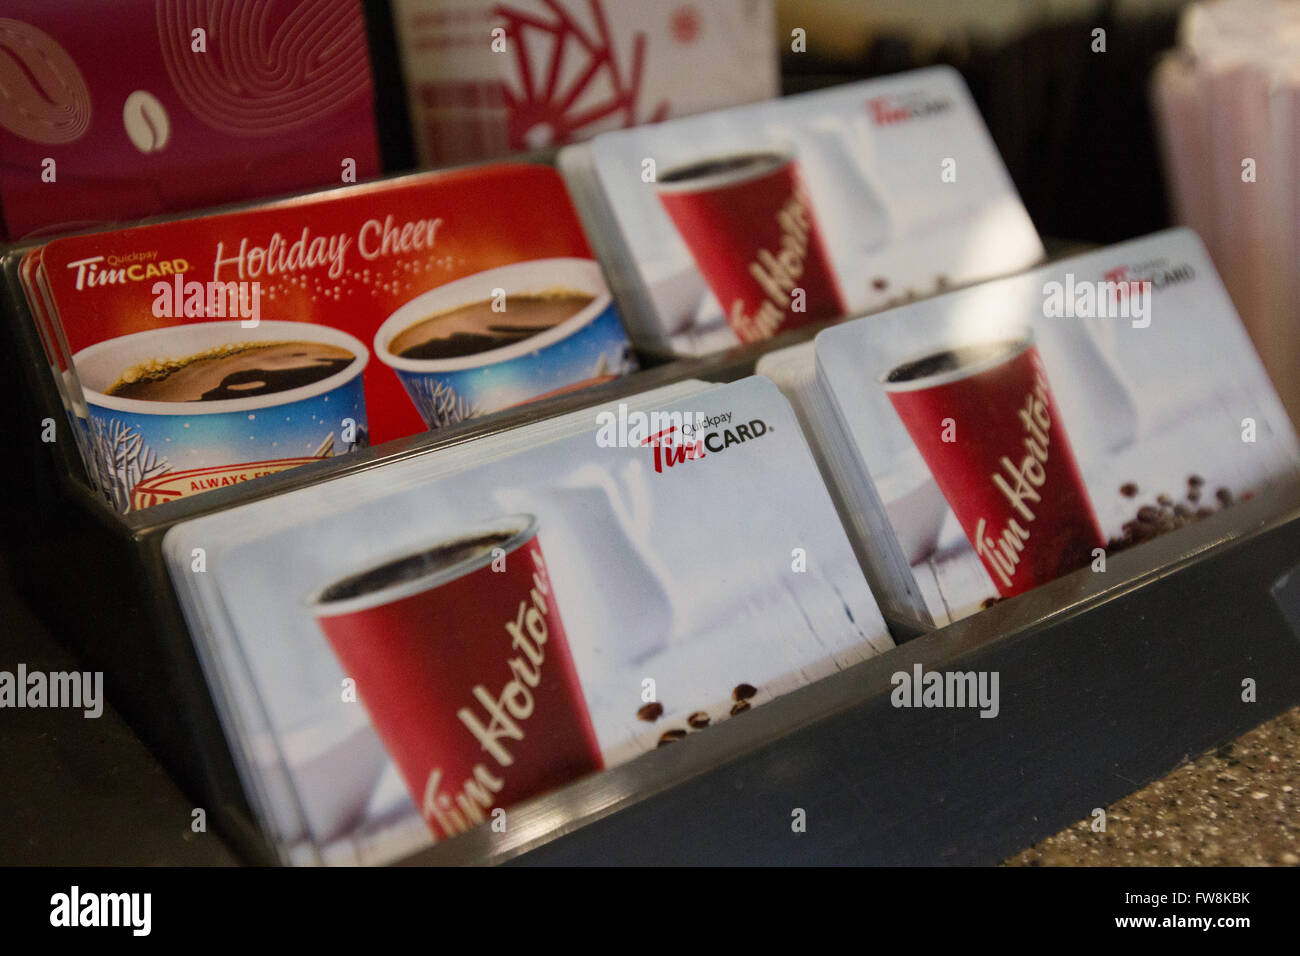 Tim Hortons coffee cups at the Tim Hortons coffee shop in Napanee, Ont., on Saturday Feb. 6, 2016. Stock Photo